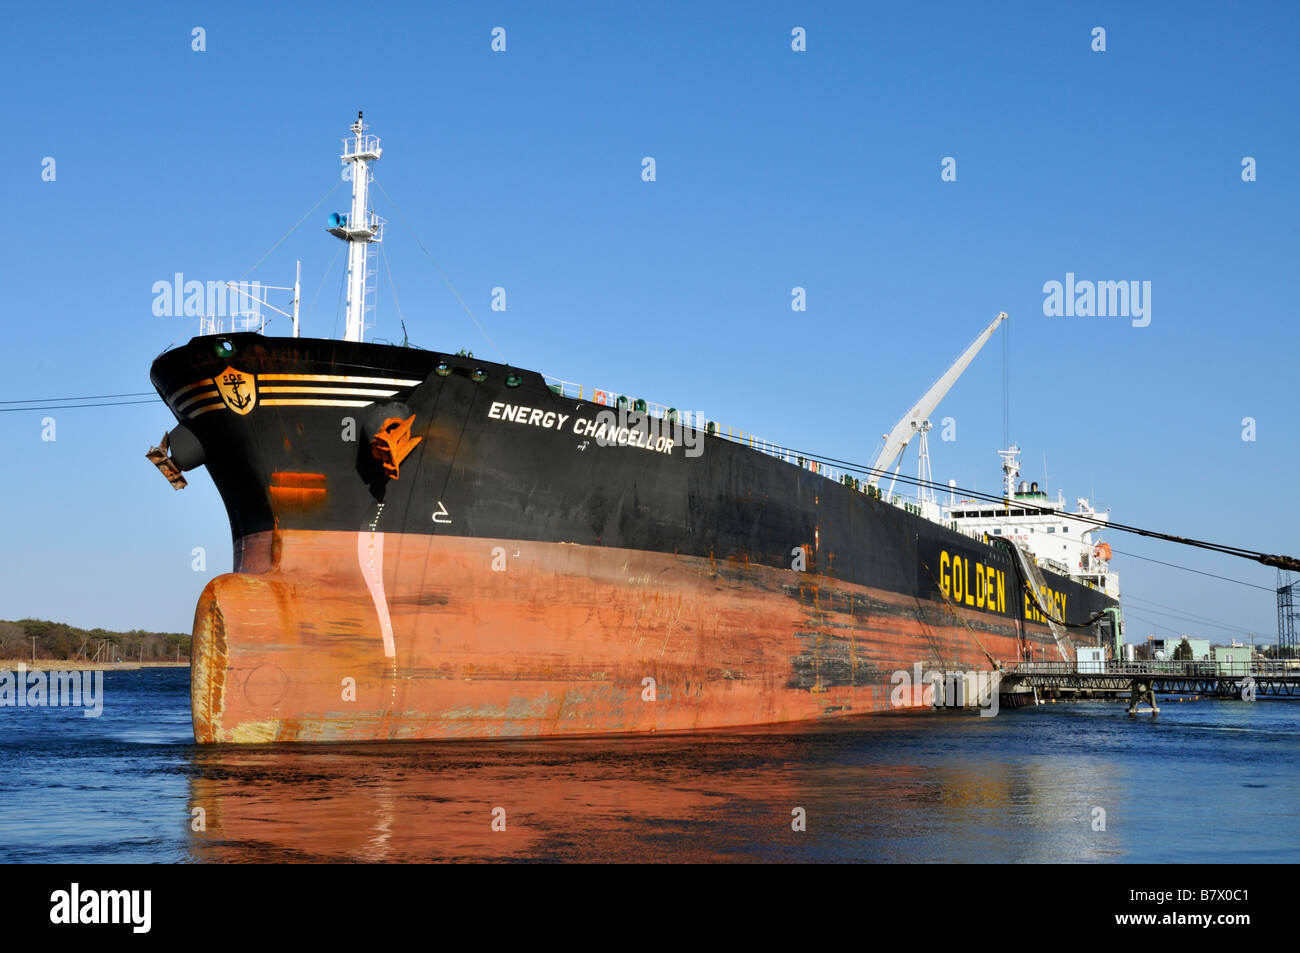 Fuel tanker Energy Chancellor tied off to pier from a low angle at the bow Stock Photo